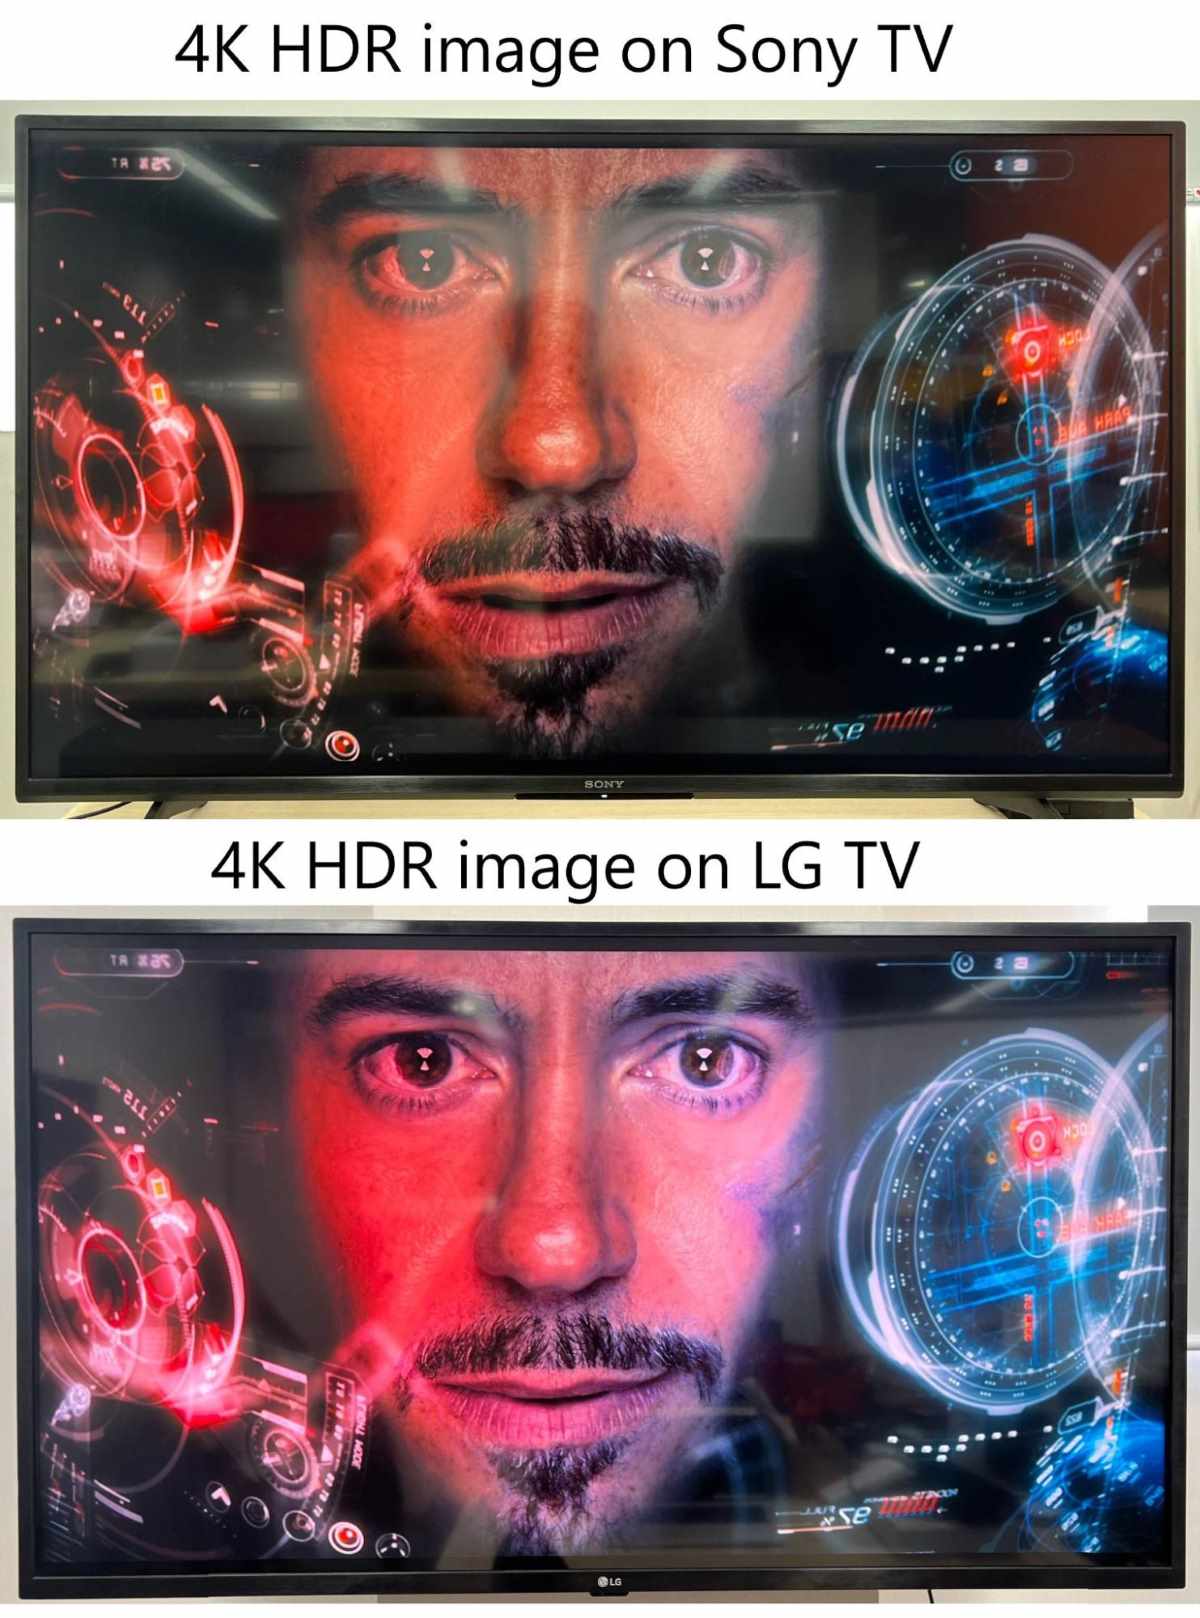 comparison of 4K HDR image between Sony TV and LG TV